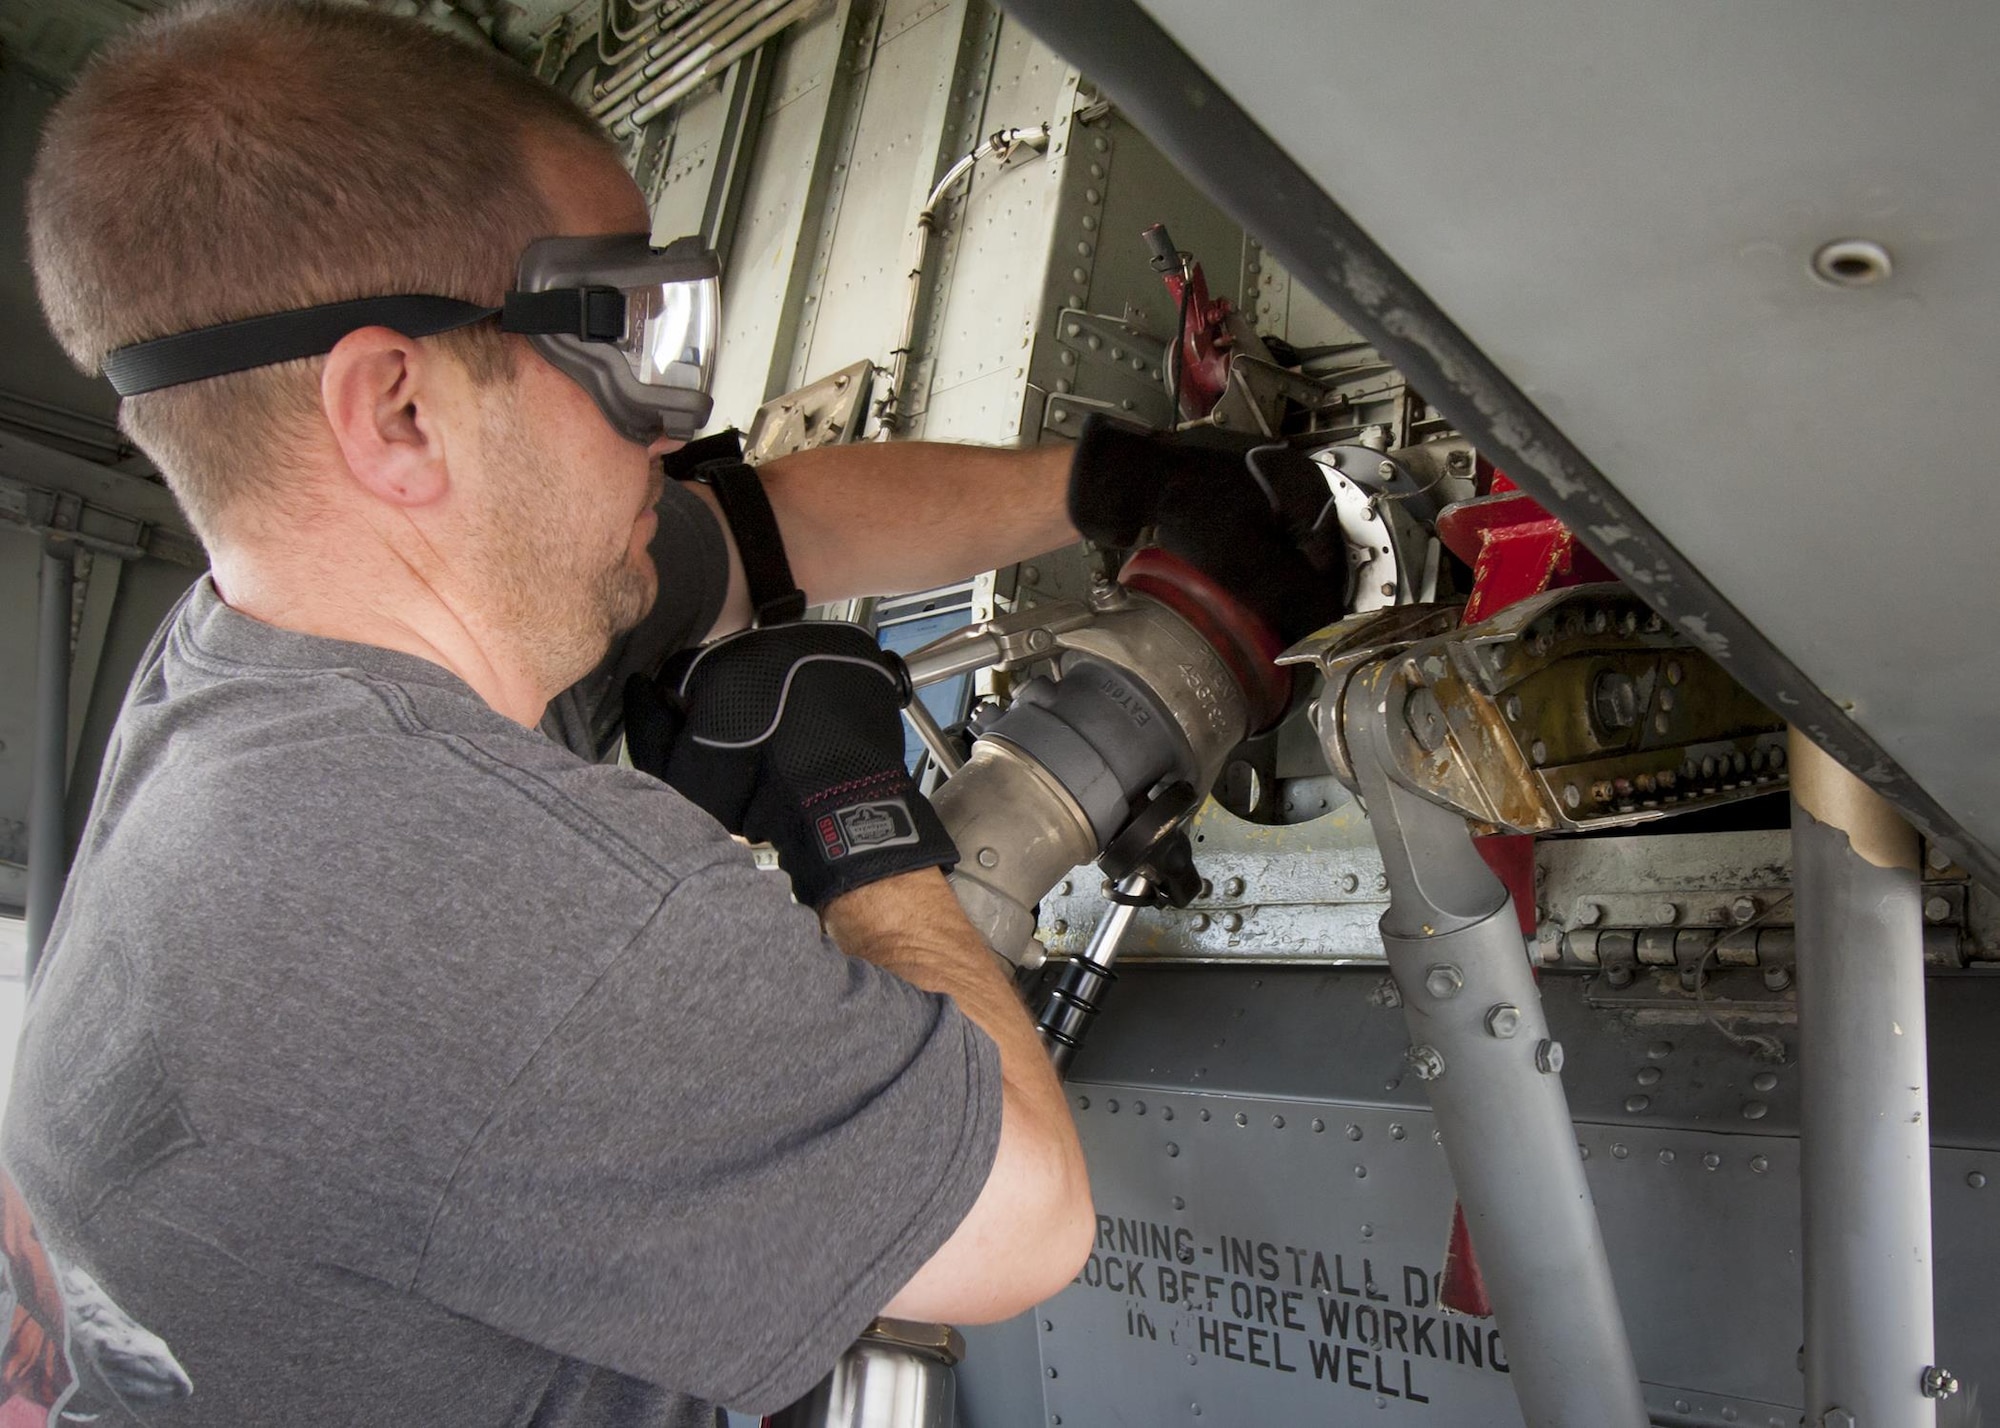 Tech. Sgt. Thomas Conroy, 459th Aircraft Maintenance Squadron crew chief, attaches a fuel line to a KC-135R Stratotanker prior to refueling on the Joint Base Andrews, Maryland, flight line July 20, 2017. The KC-135 is refueled using a truck equipped with a hydraulic system to draw fuel from an underground reservoir onto the aircraft. (U.S Air Force photo/Tech. Sgt. Kat Justen)